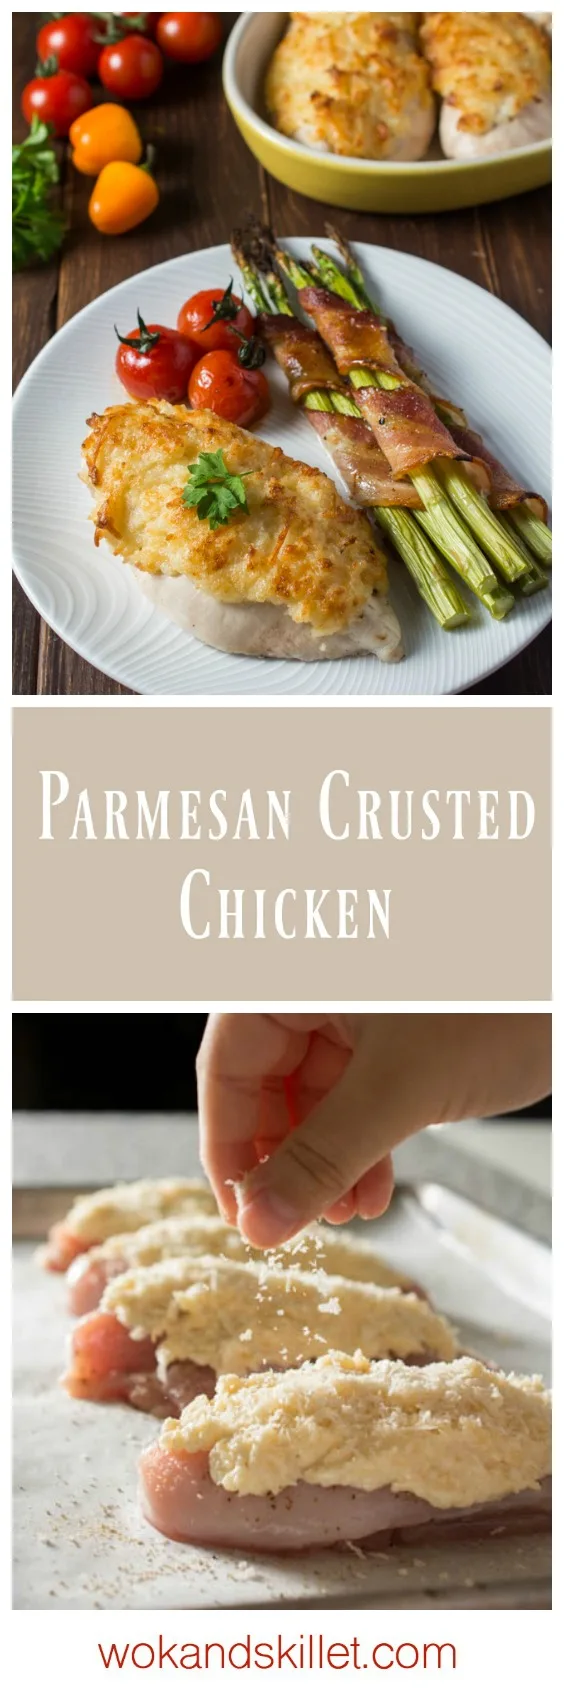 Parmesan Crusted Chicken is guaranteed to turn out super-moist and juicy every single time. Takes just minutes to prepare, which makes it perfect for a family weeknight meal yet it is elegant enough for your next romantic evening in.